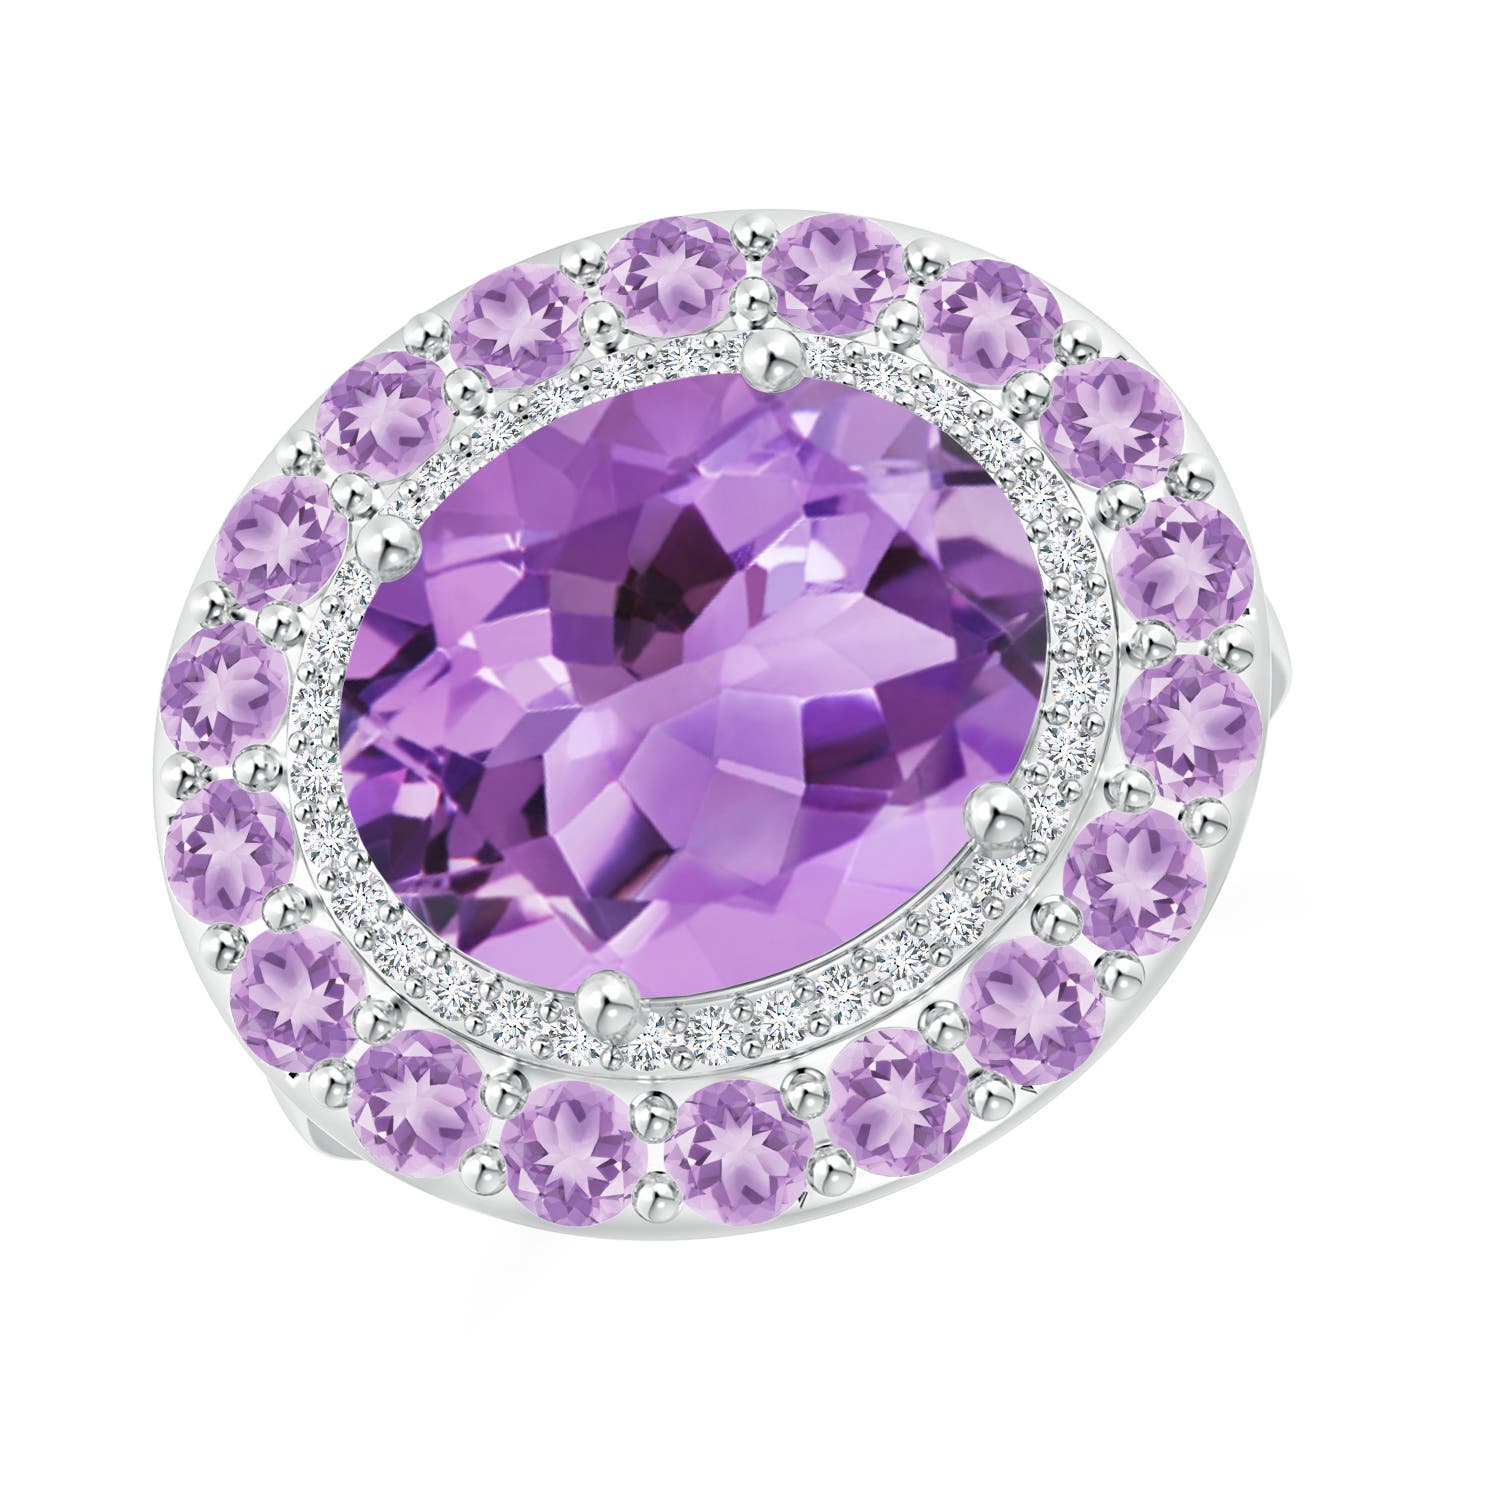 A - Amethyst / 5.55 CT / 14 KT White Gold